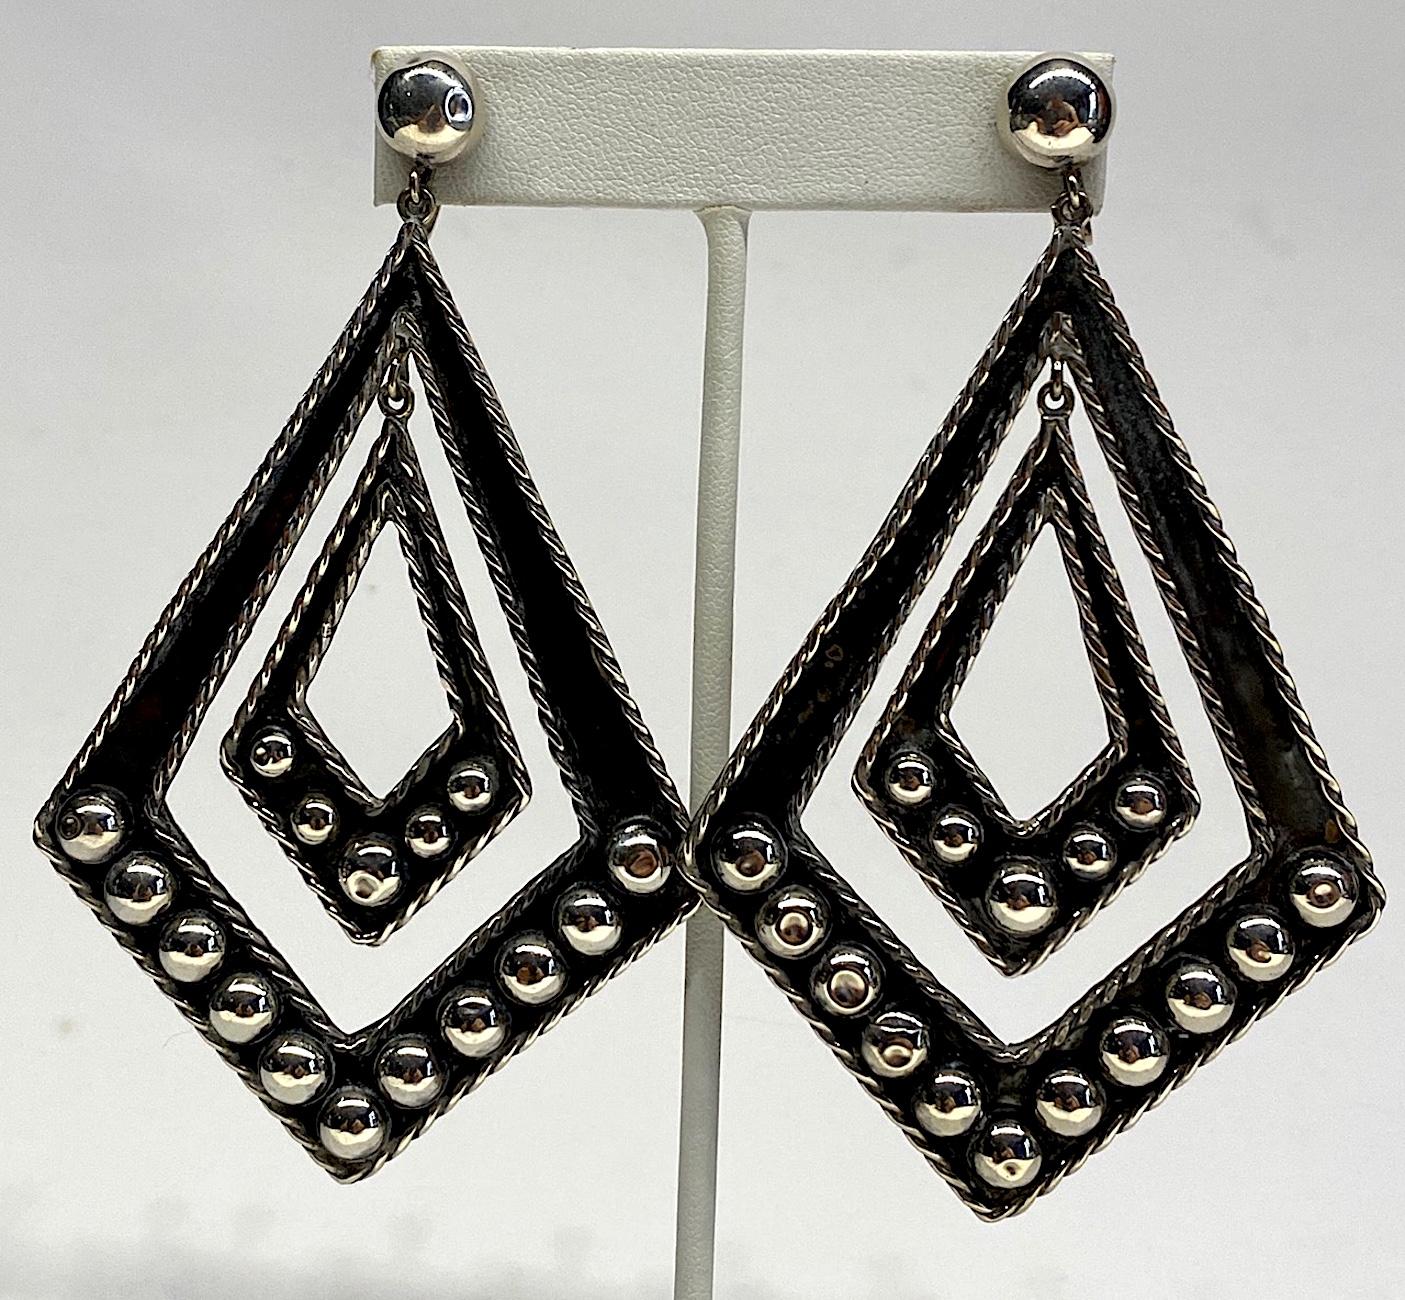 A beautiful pair of artisan made late 1940s to 1950s sterling earring from Taxco, Mexico. Each earring is 2.5 inches wide and 4 inches long with a screw back typical of the period. The larger diamond houses a smaller 1.13 wide and 2 inch long